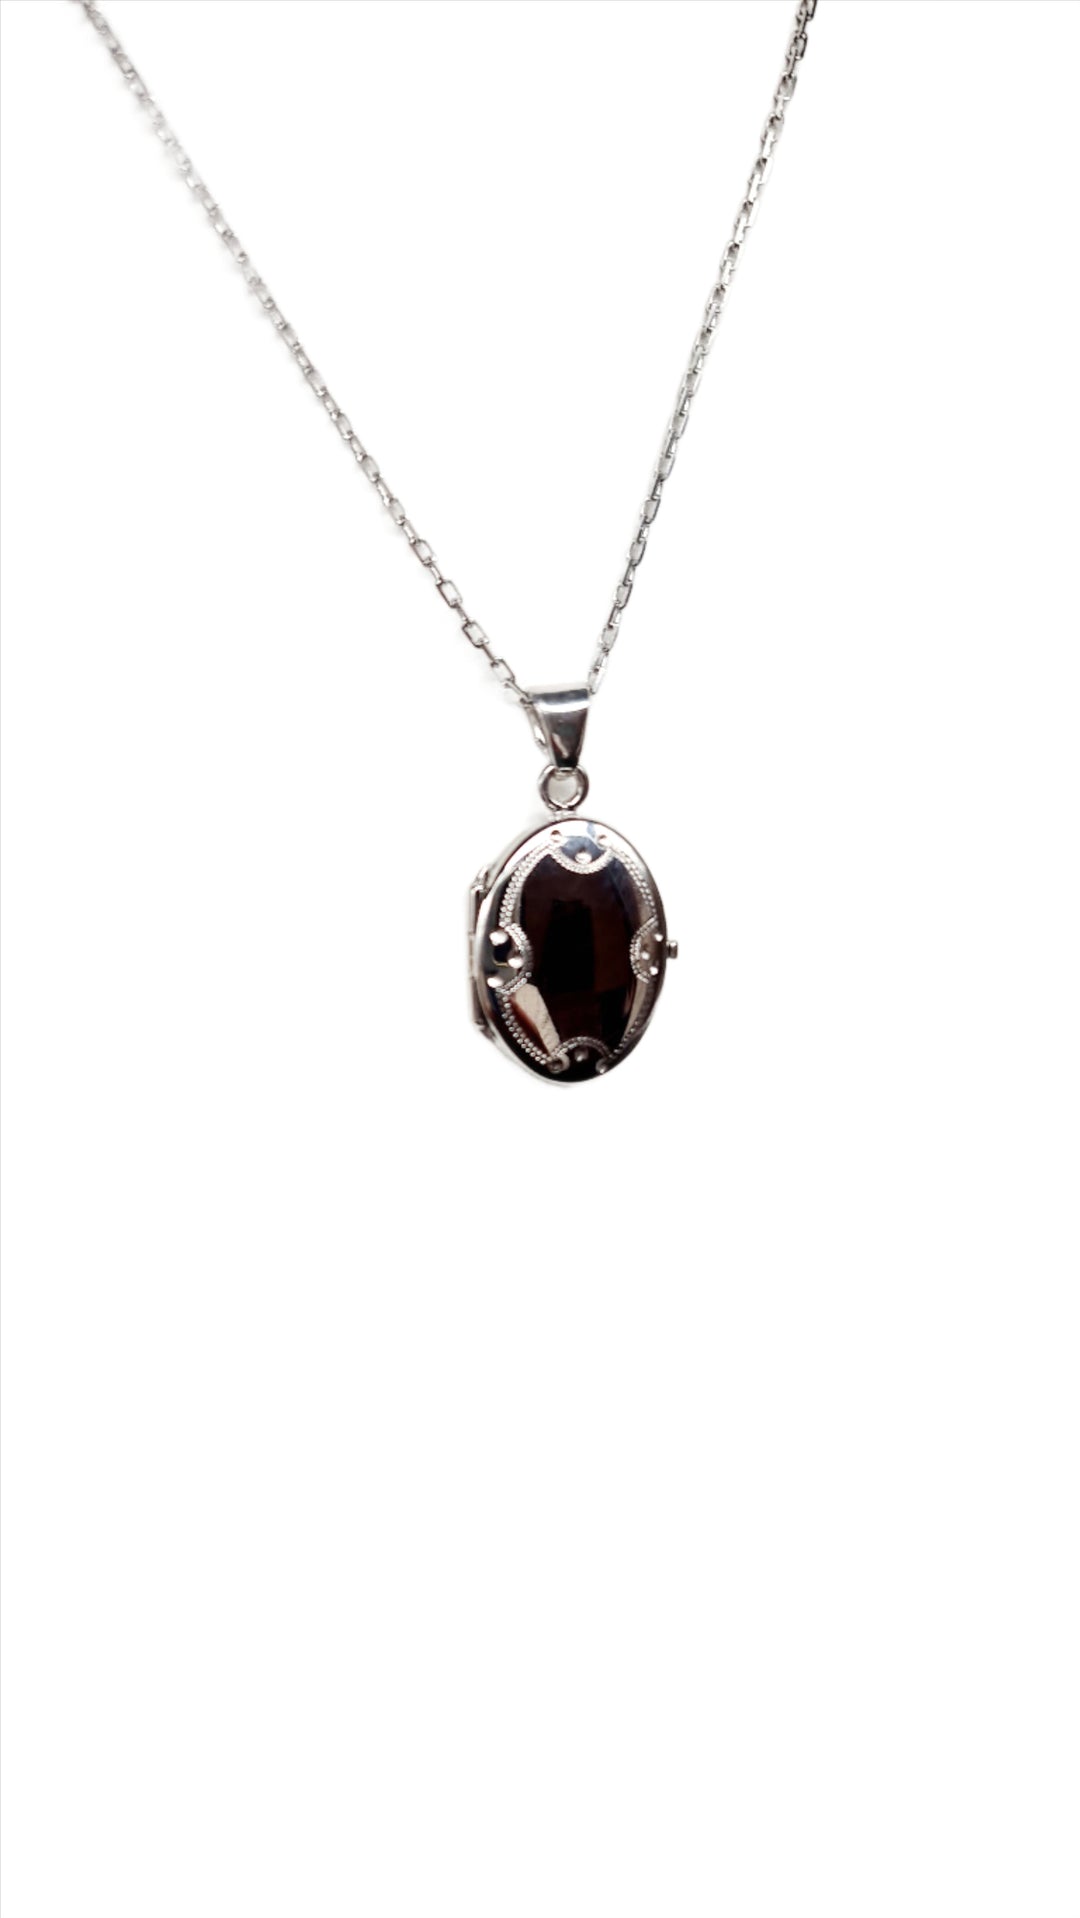 Sterling Silver Necklace With Oval Locket